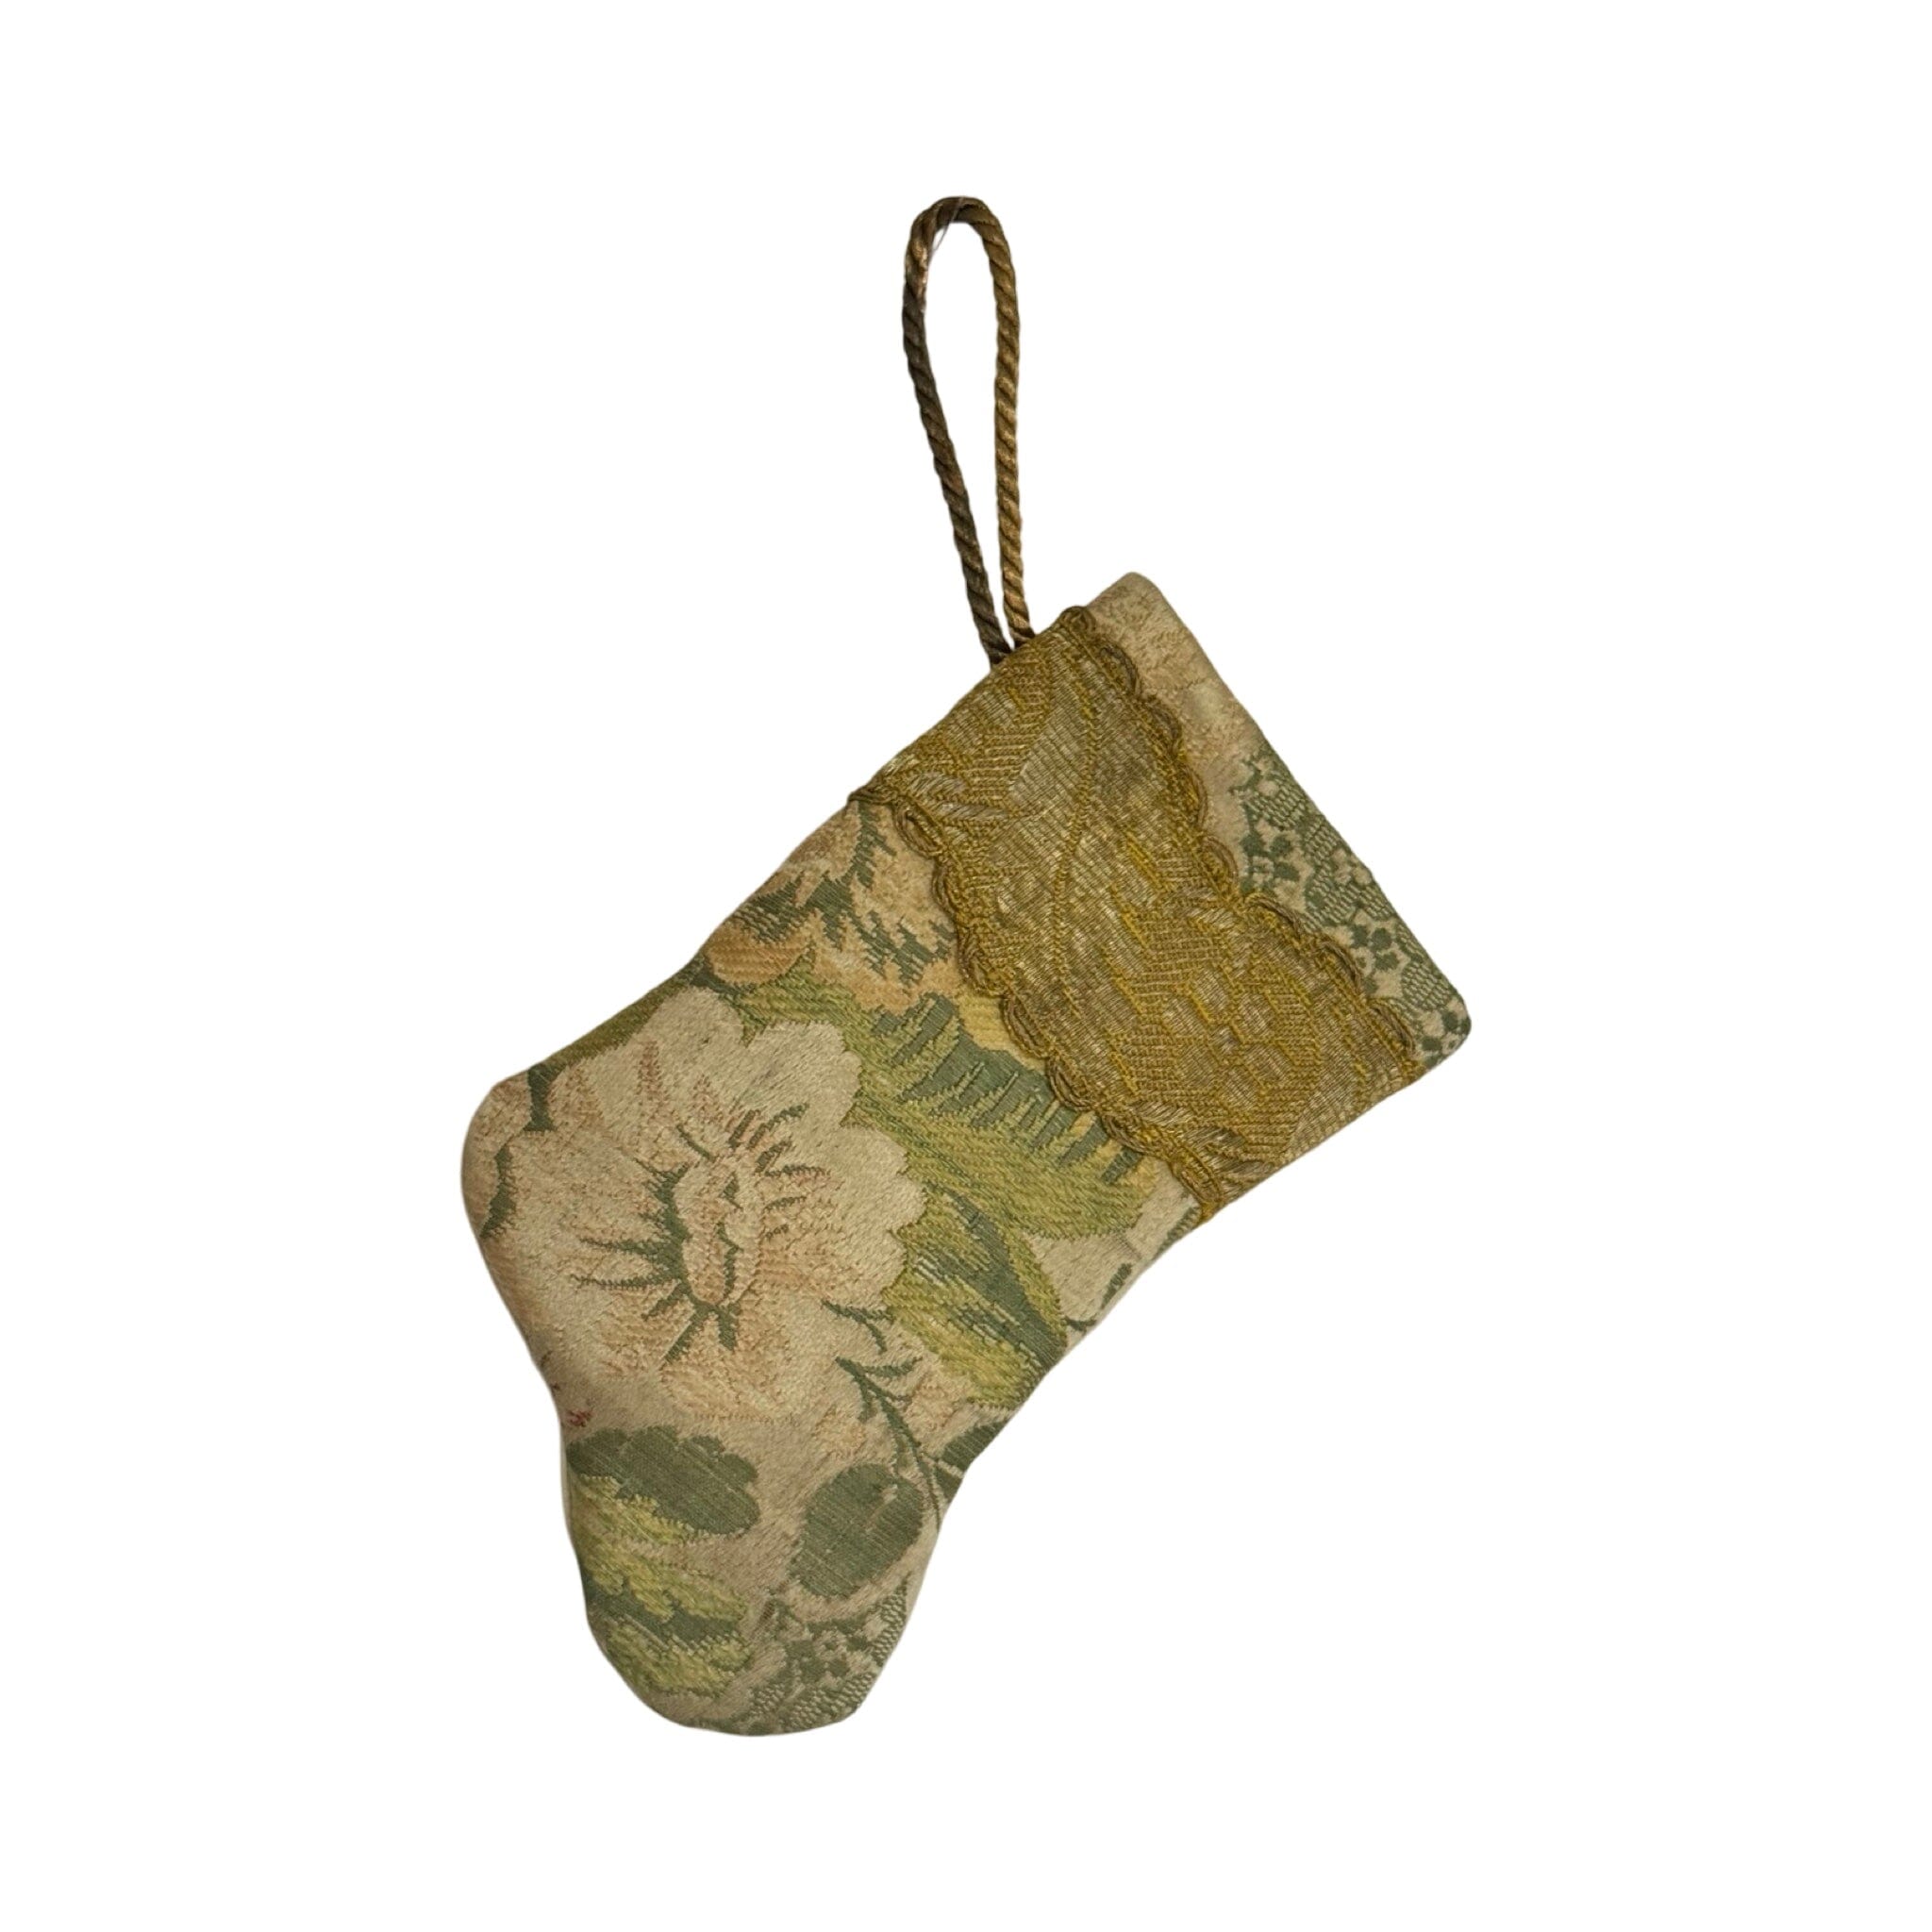 Handmade Mini Stocking Made From Vintage Fabric and Trims- Green and Gold Ornament B. Viz Design B 